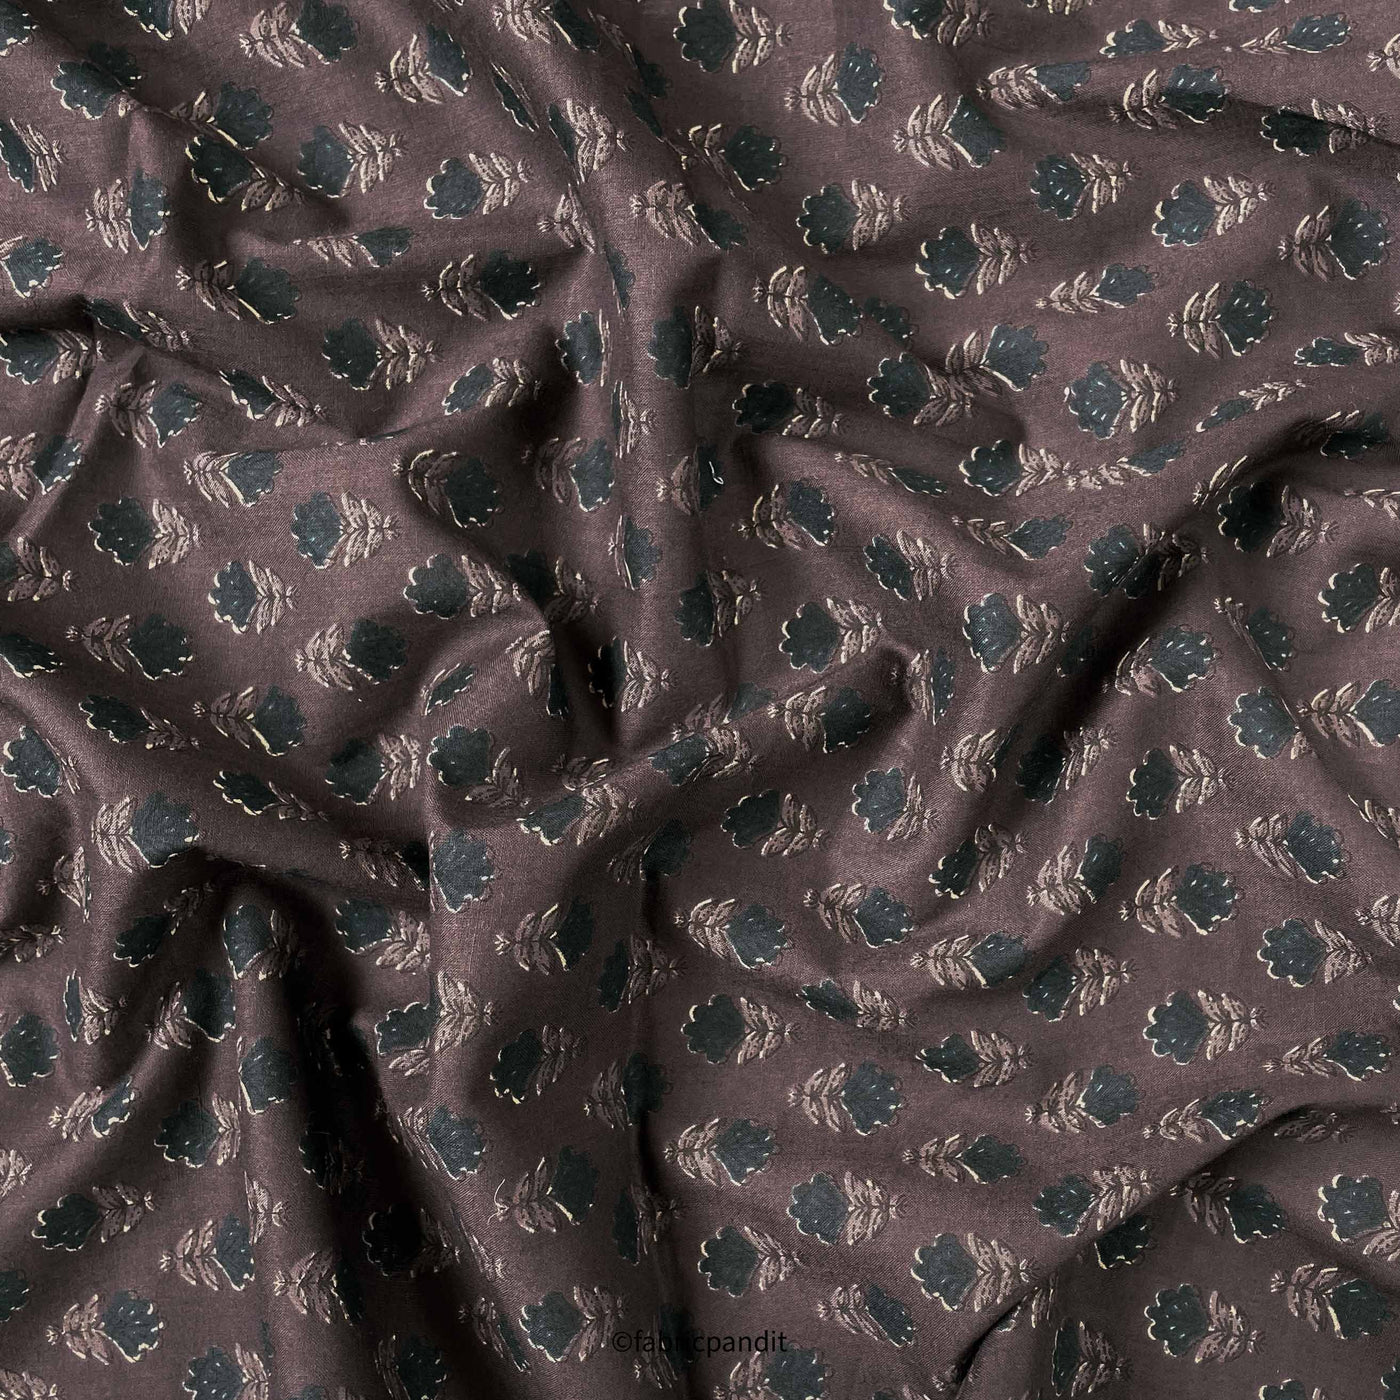 Hand Block Printed Cotton Fabric Cut Piece (CUT PIECE) Coffee Brown Mini Floral Hand Block Printed Pure Cotton Fabric (Width 42 inches)